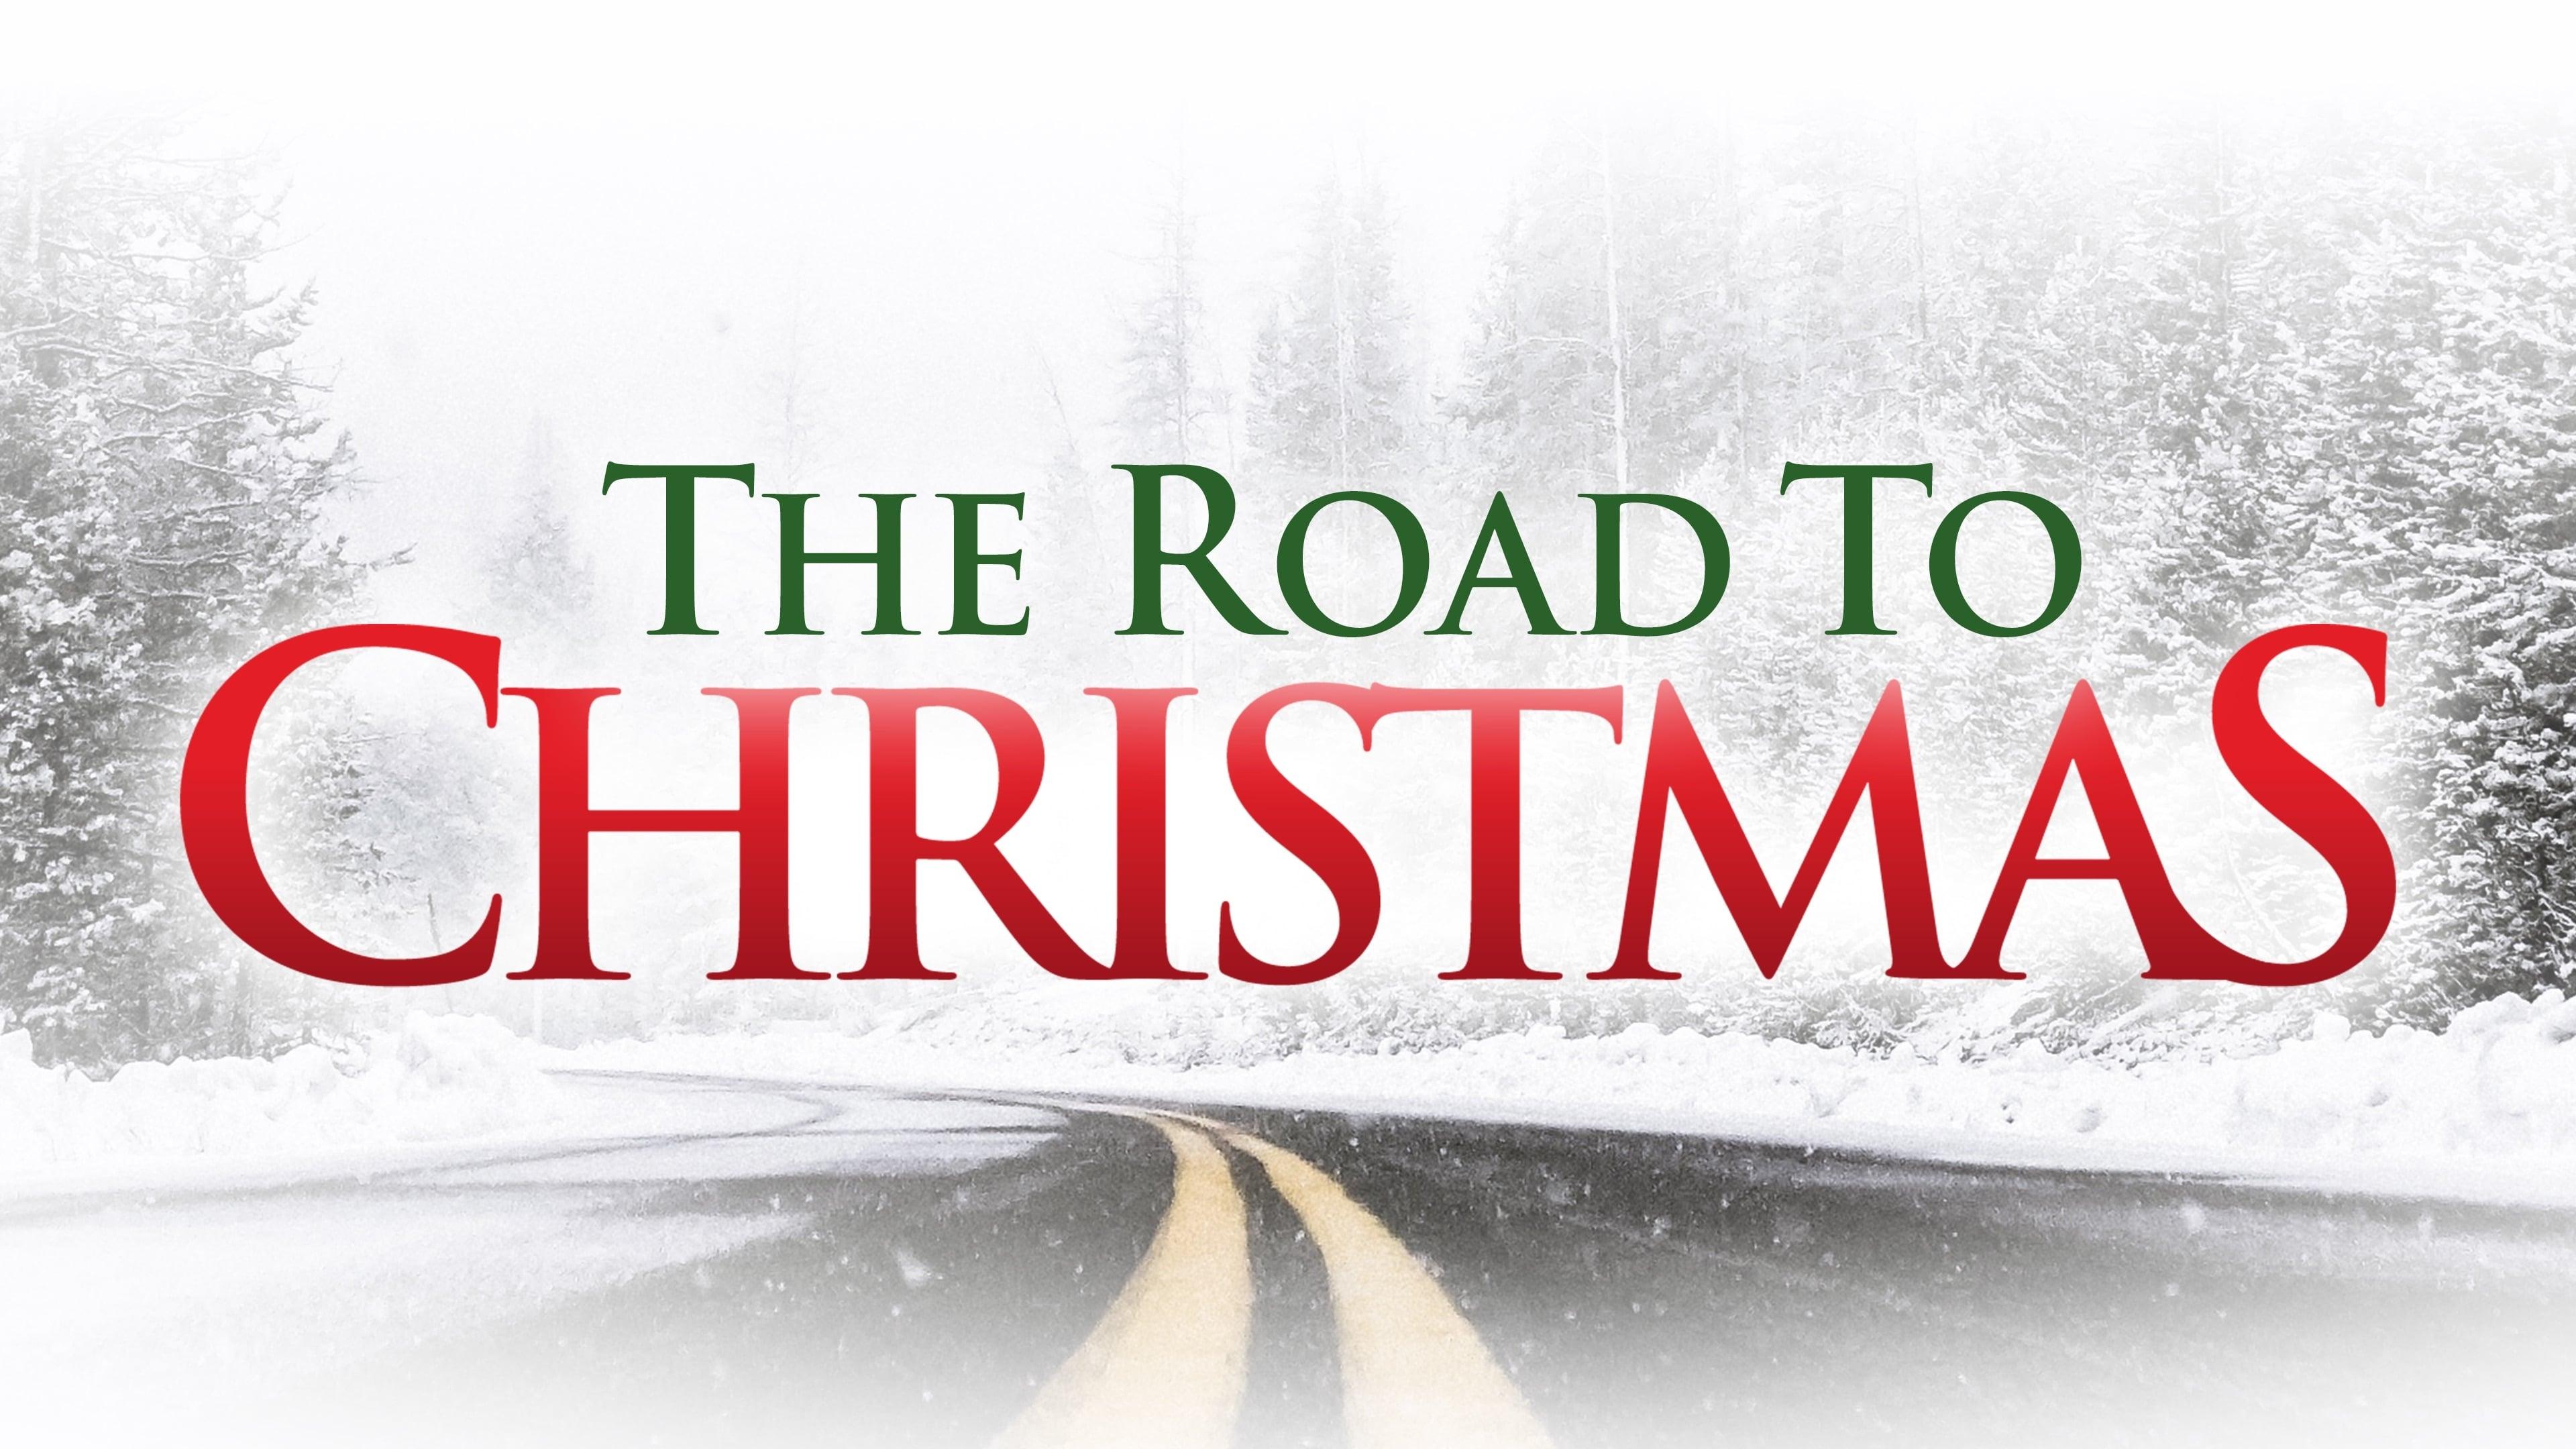 The Road to Christmas backdrop